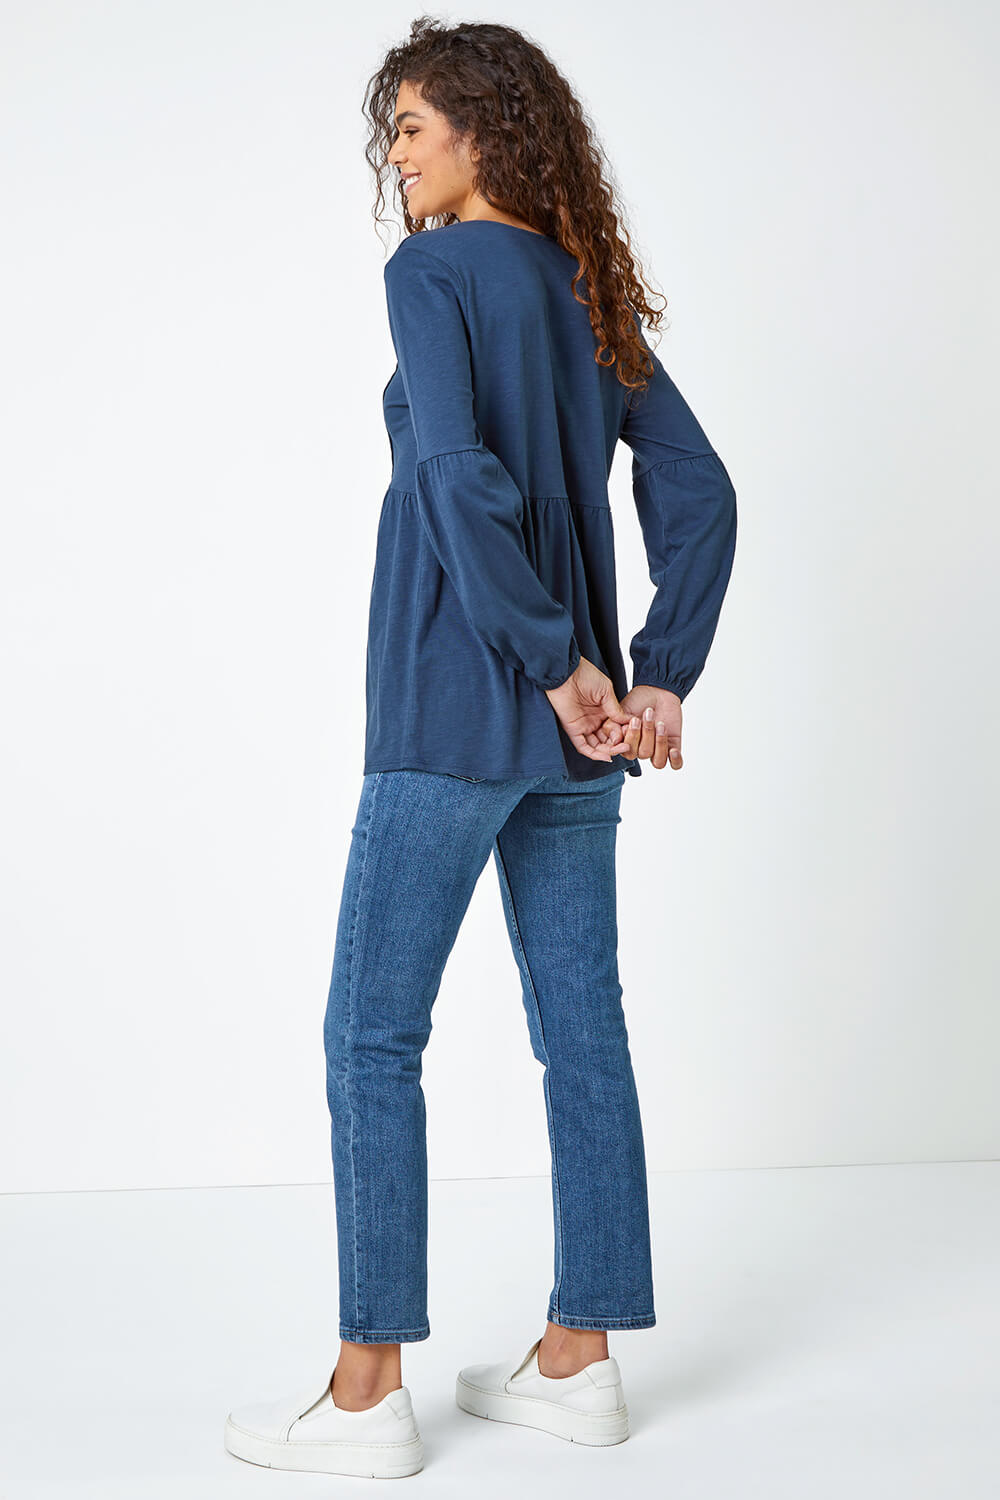 Navy  Pleated Smock Tunic Top, Image 3 of 5